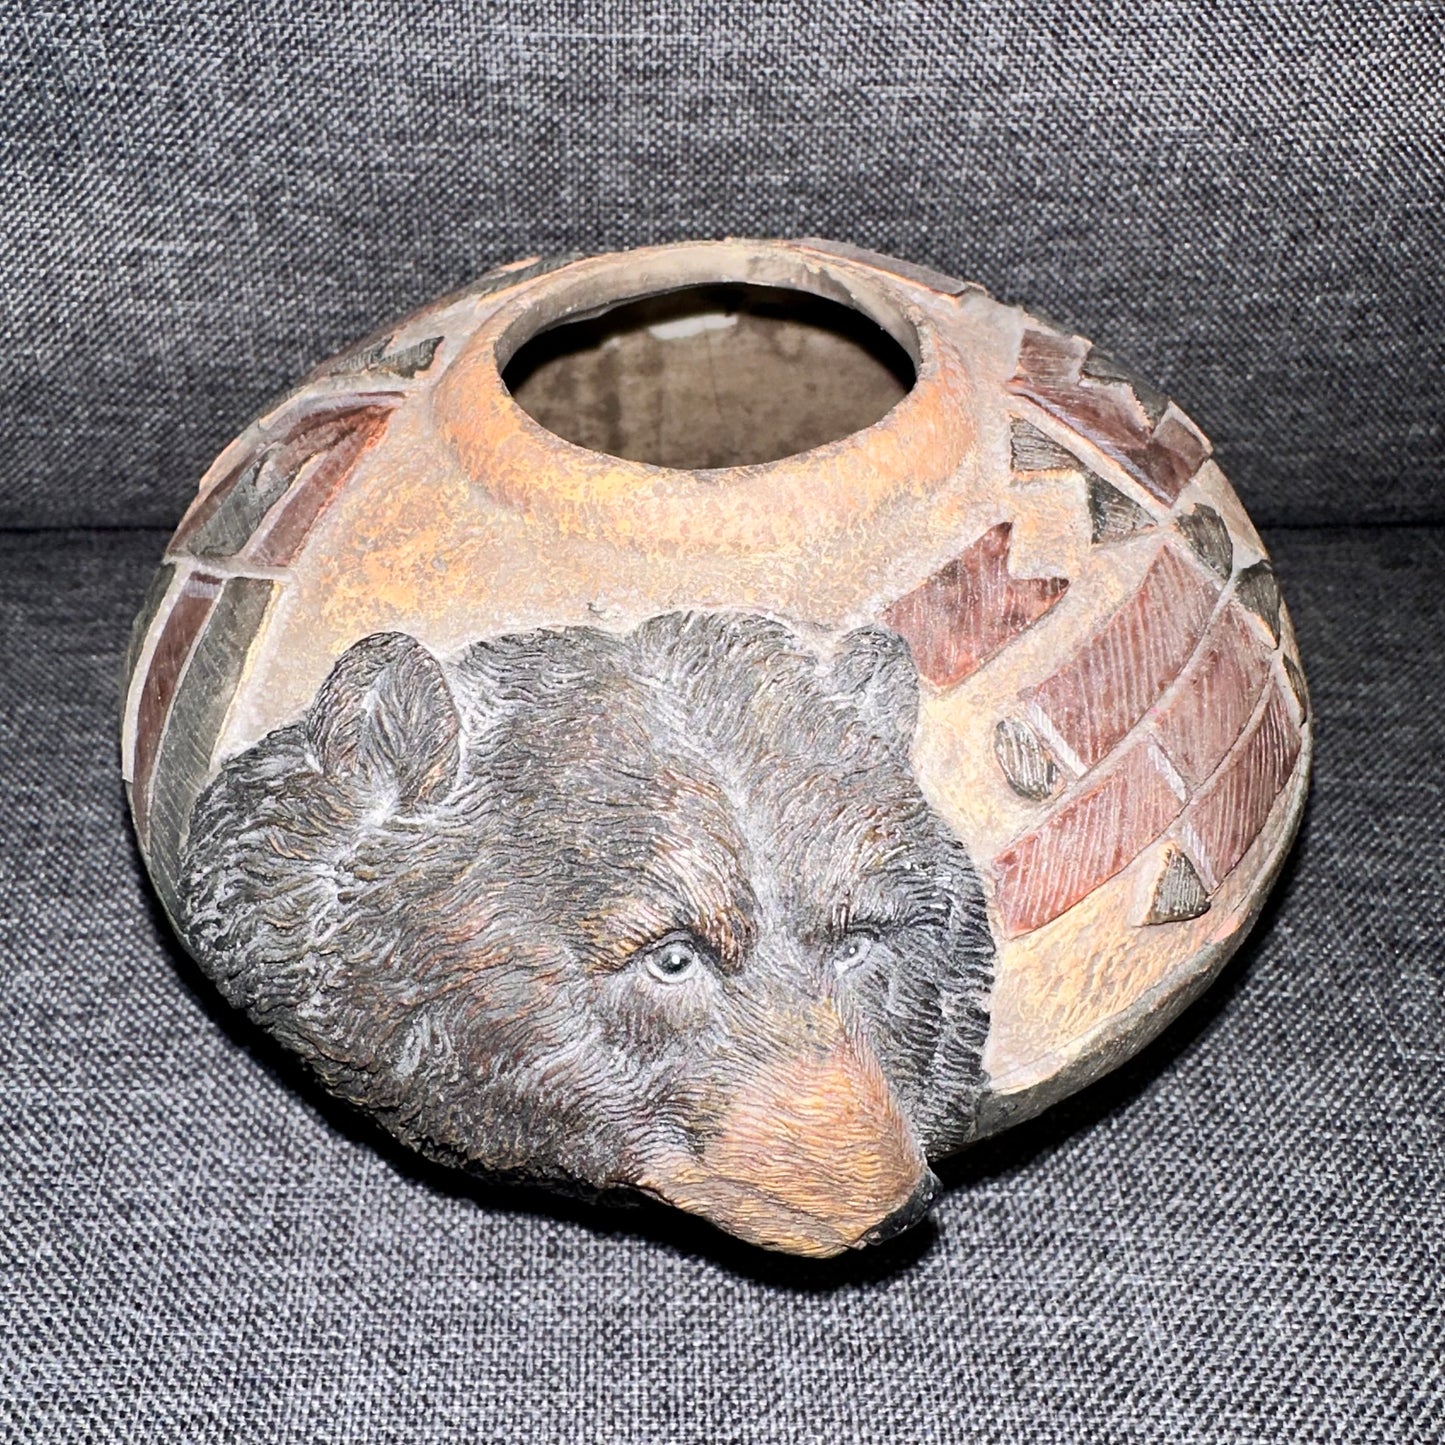 Brown Grizzly Bear Earthware Pottery Clay Ceramic Vase Planter